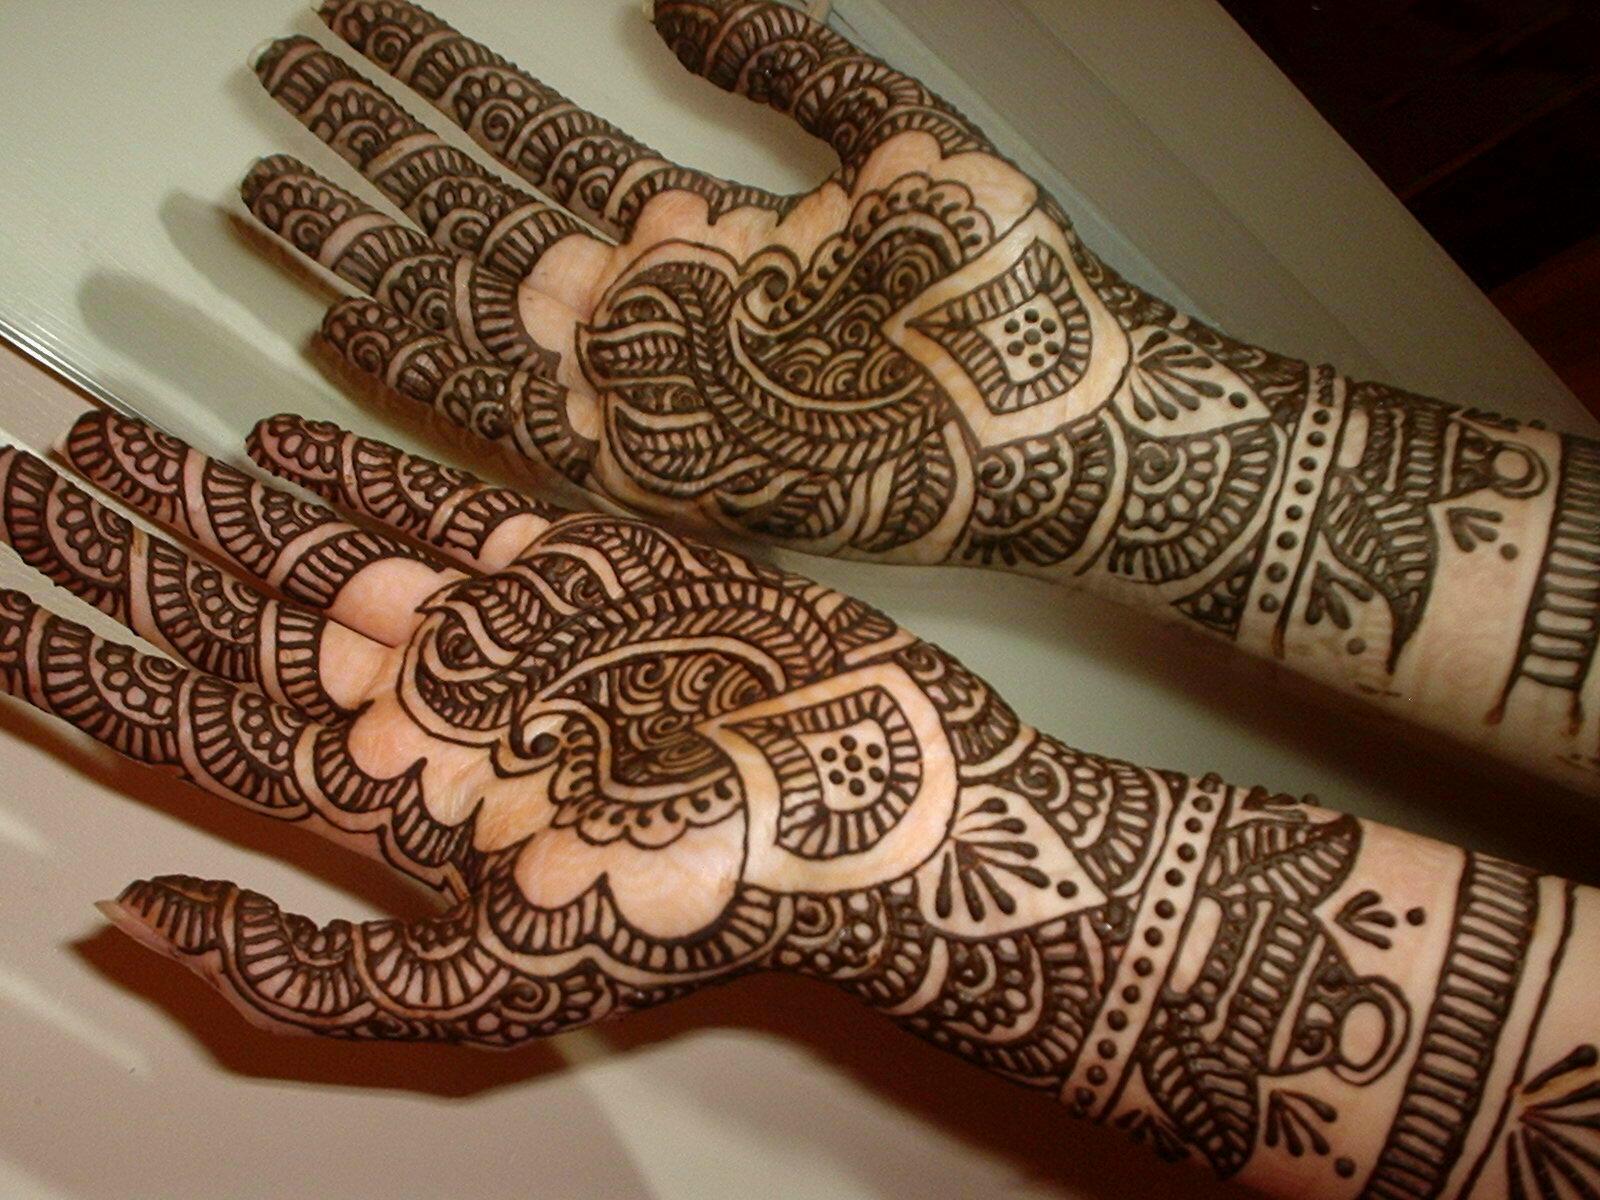 Most Pretty Mehndi And Henna Tattoos On Hands For Women